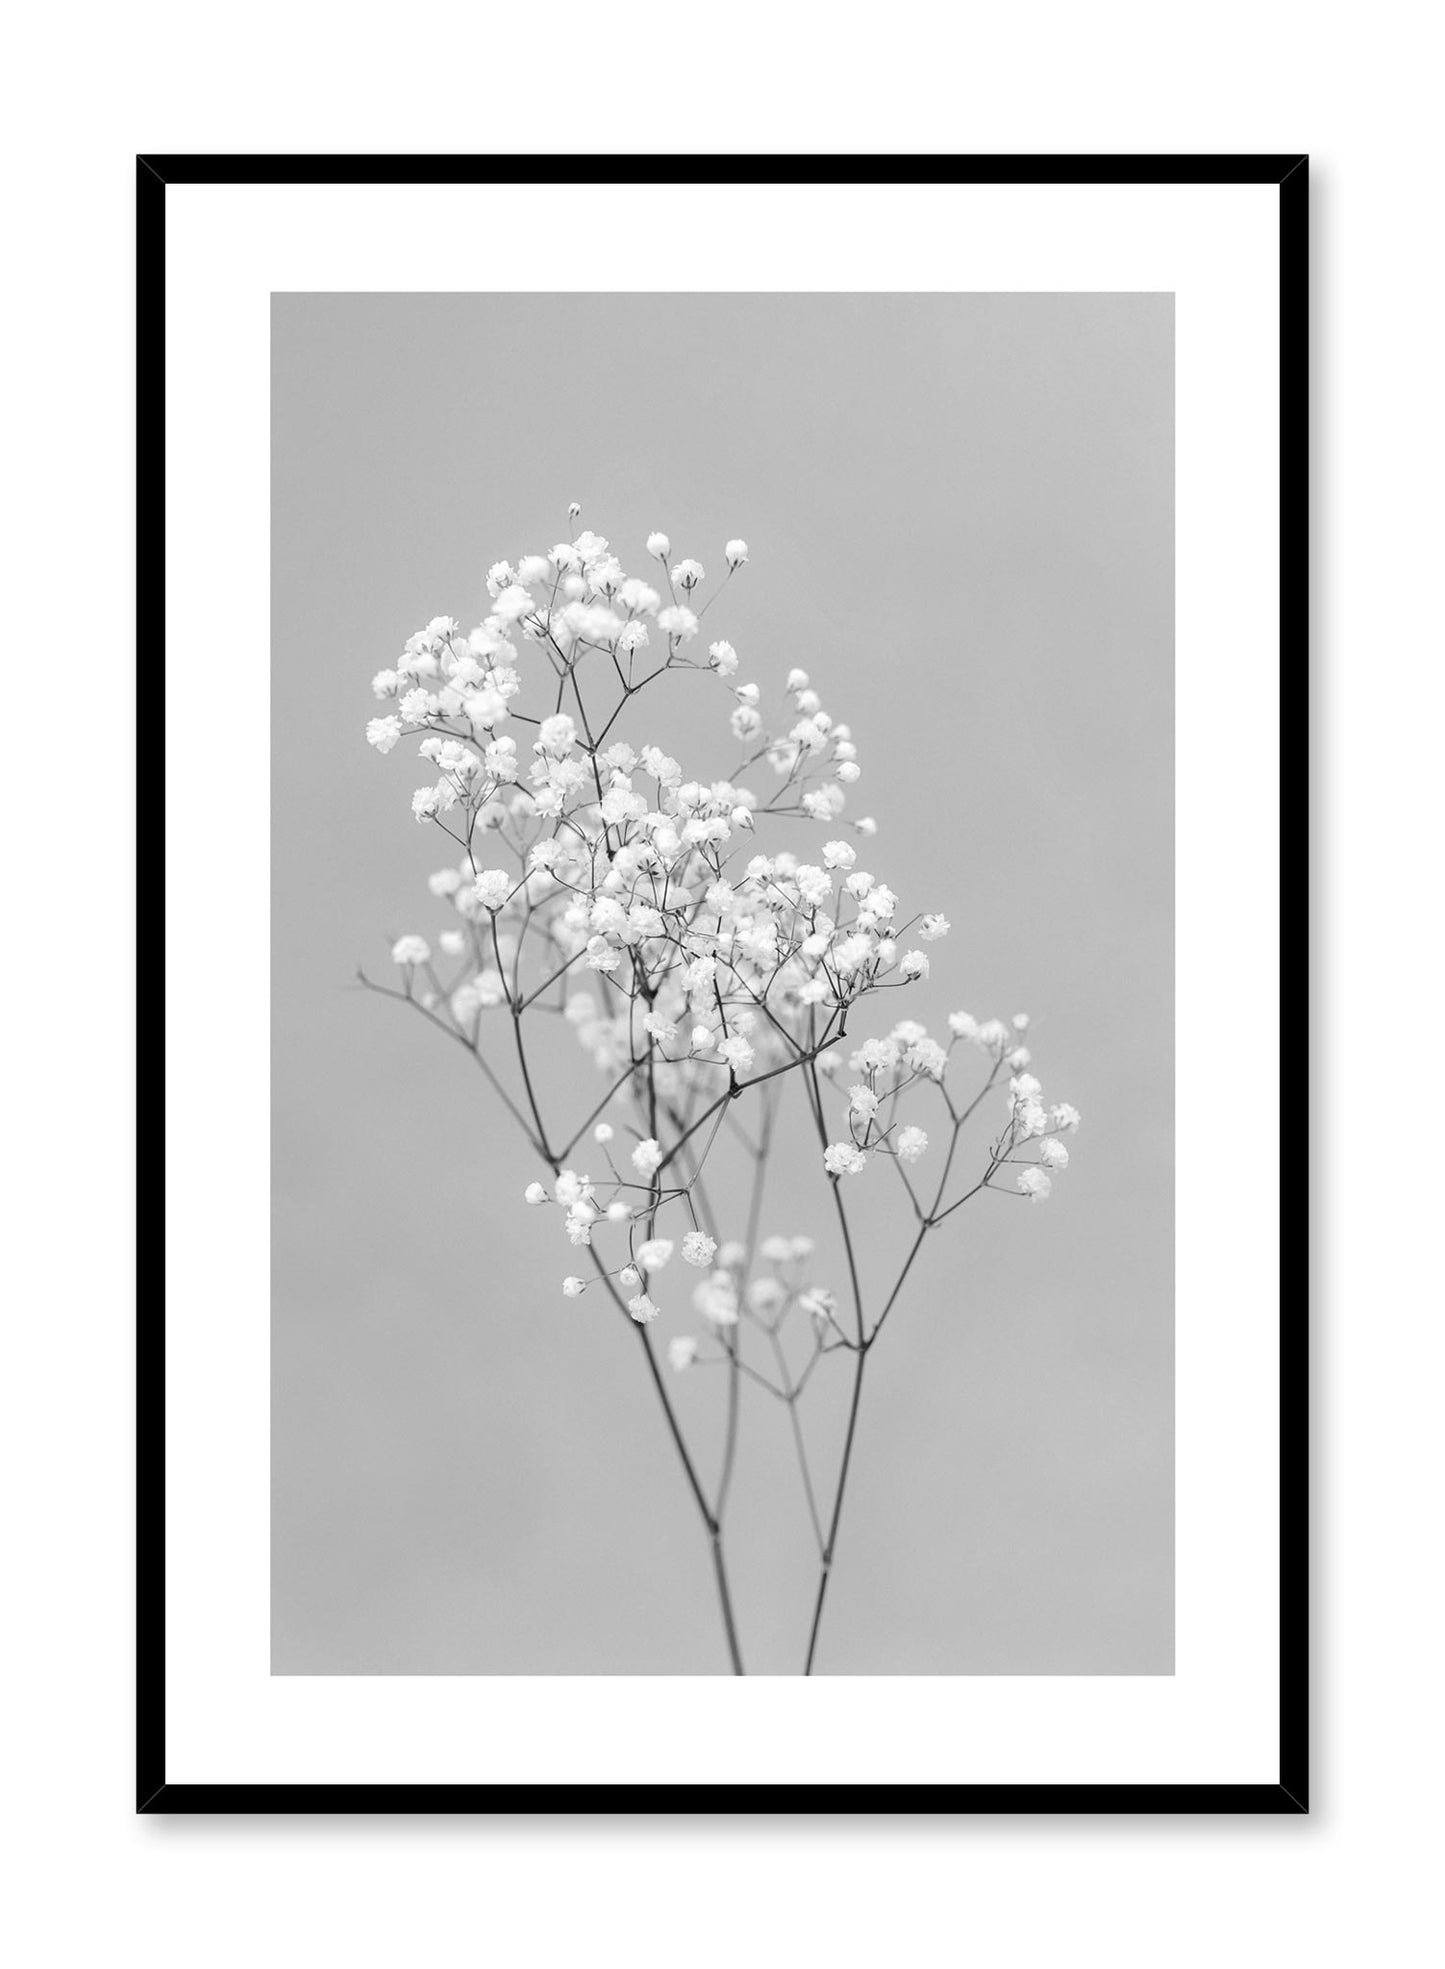 Minimalistic wall photography by Opposite Wall with Baby's Breath flower in black and white